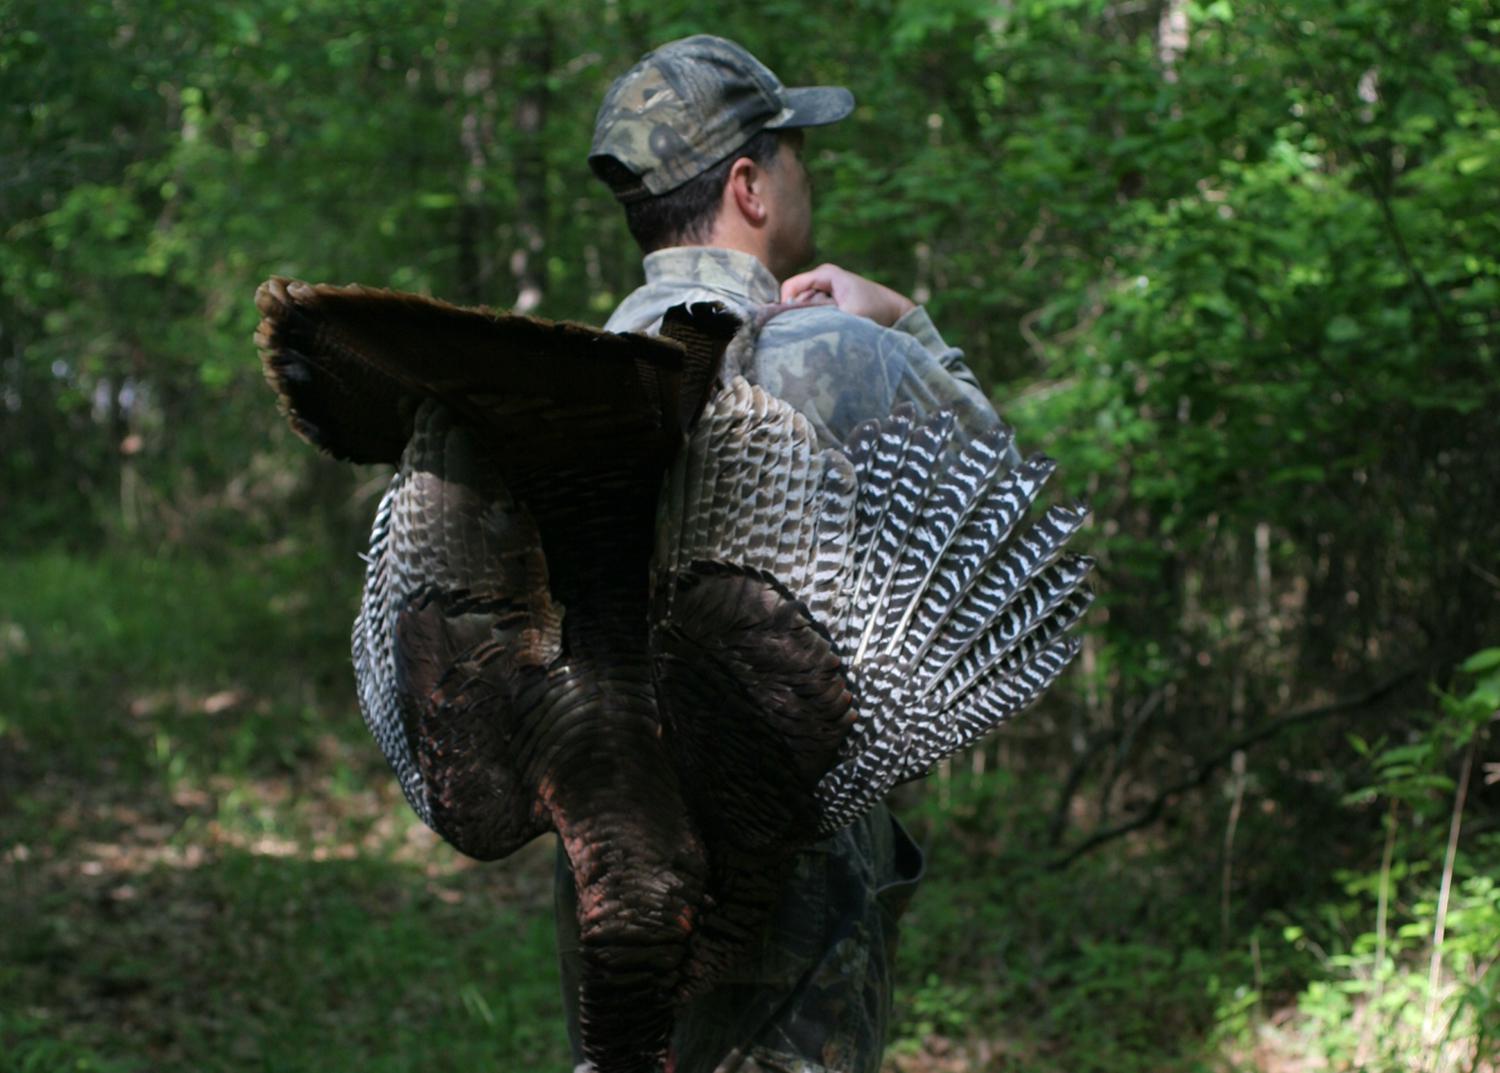 Hunter with harvested turkey on his back.